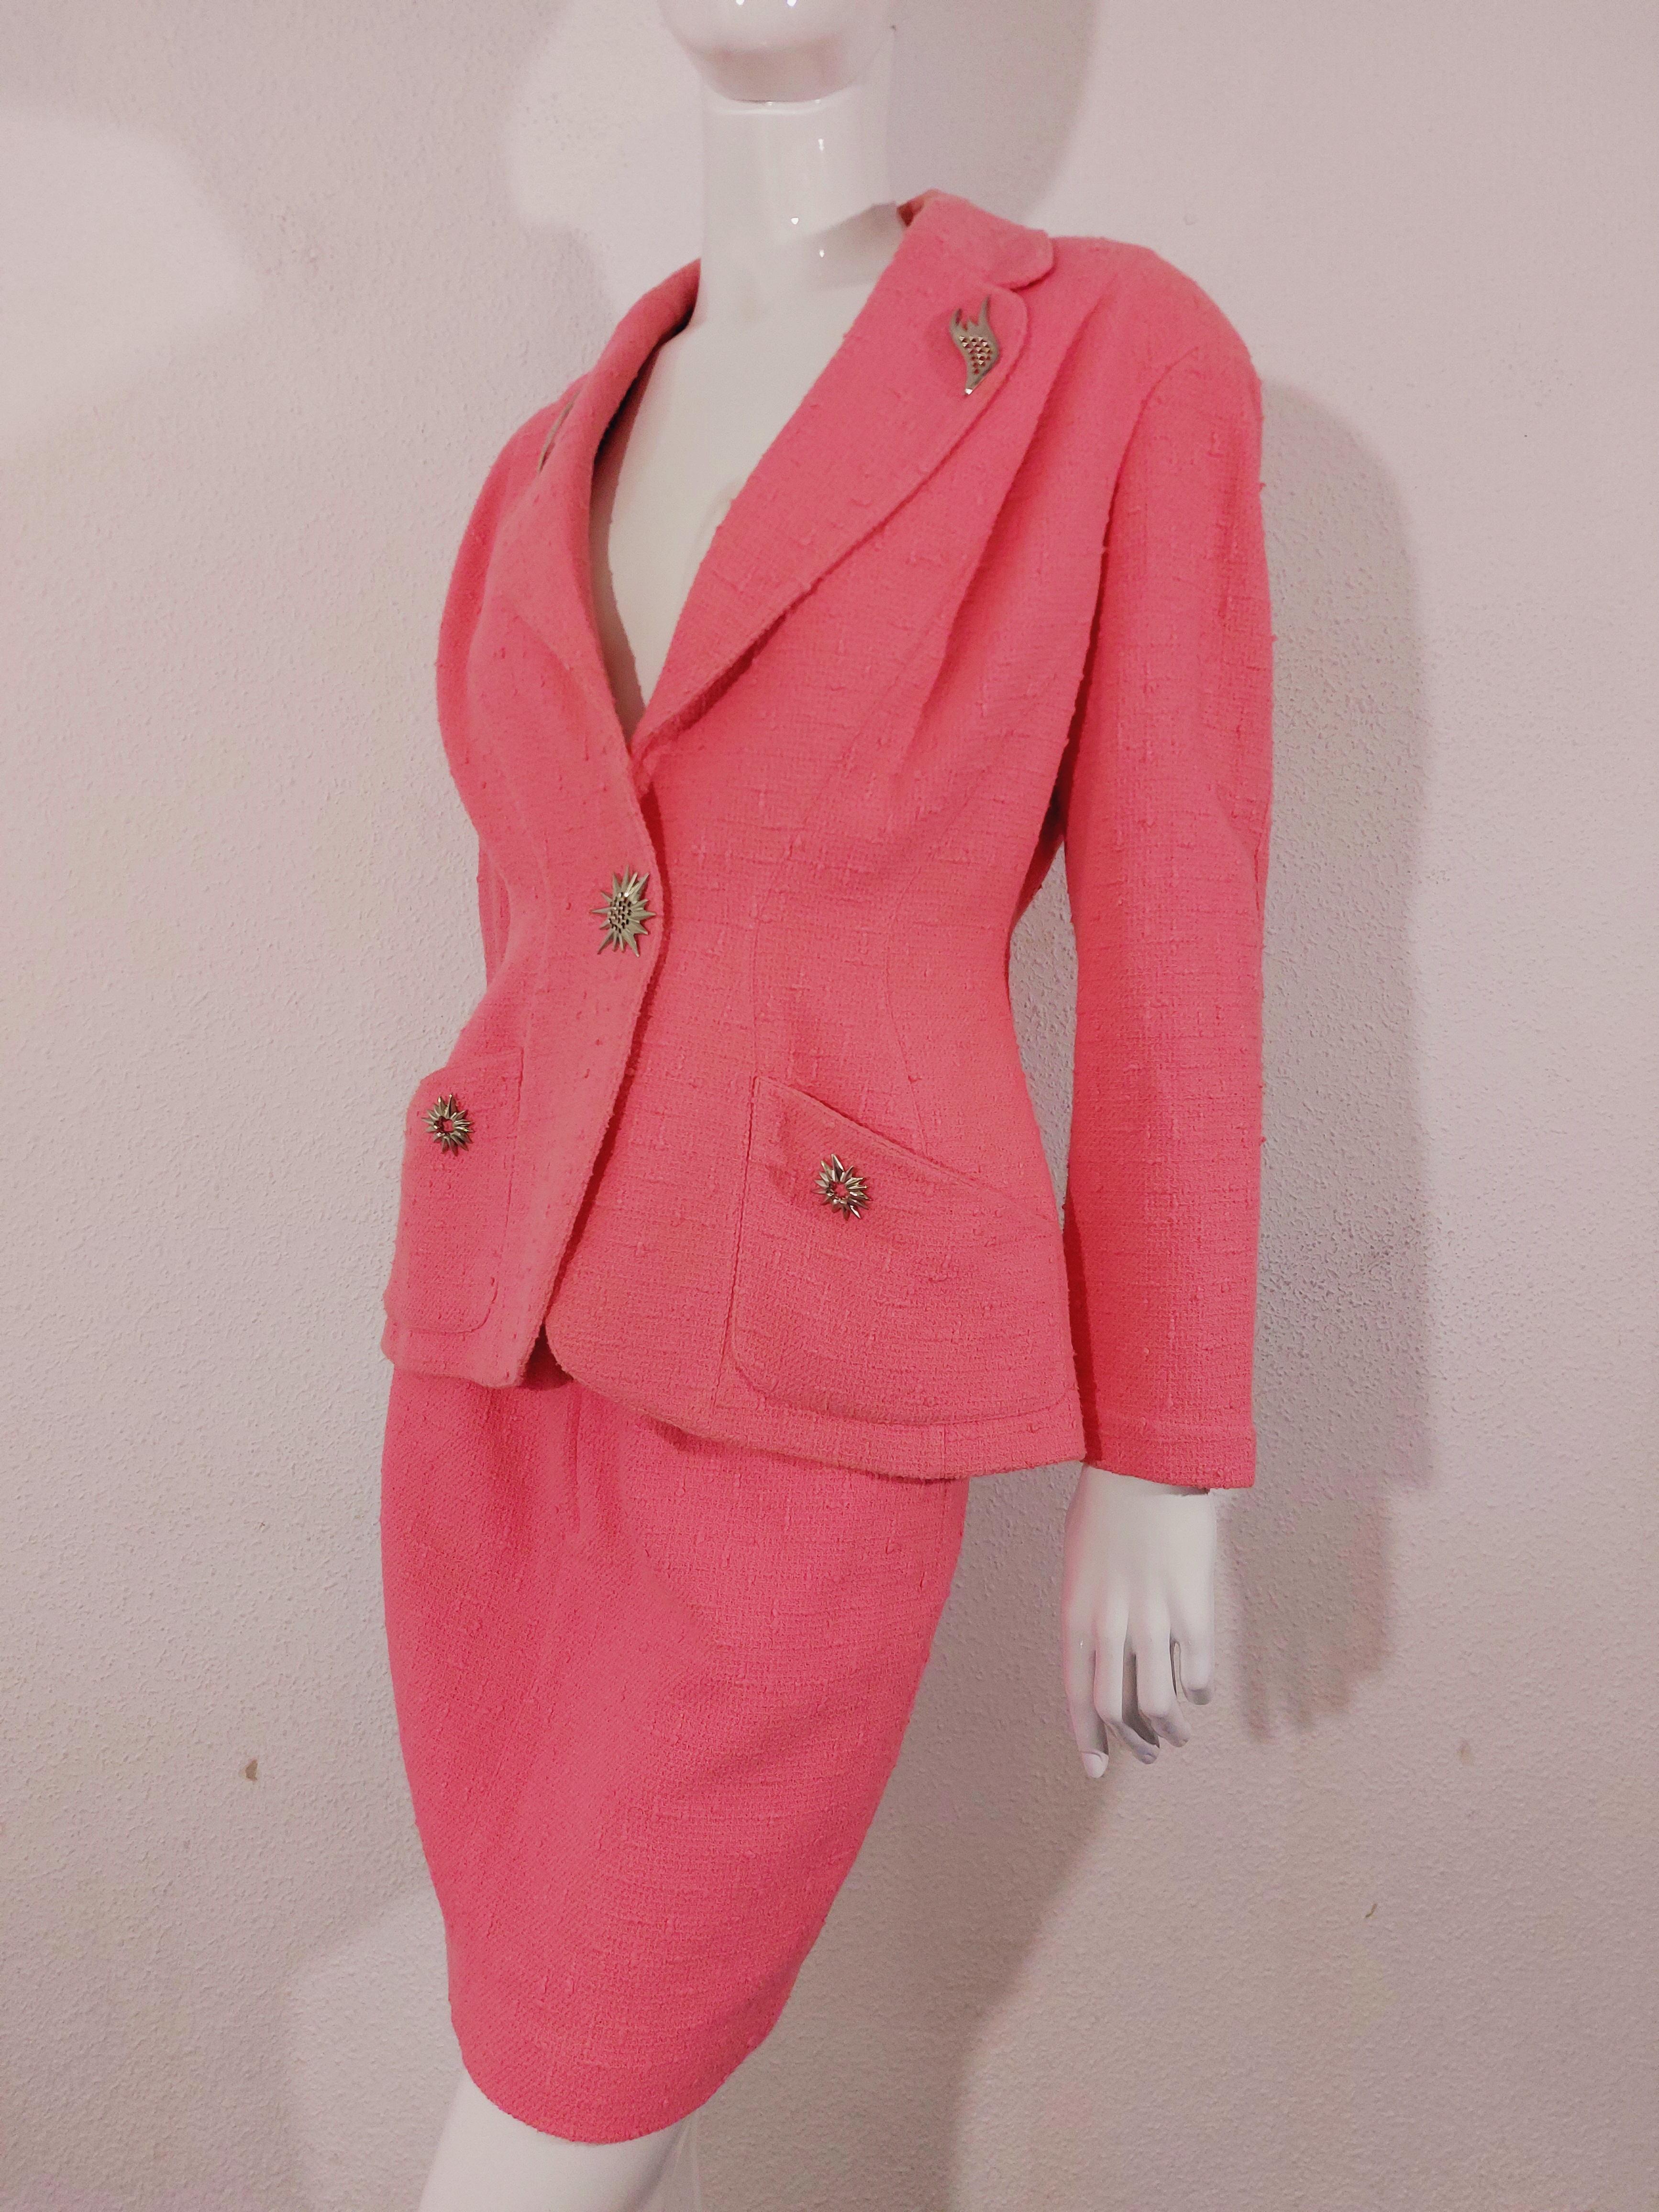 Thierry Mugler Couture Brooch FW 1990 Pin Pink Badge Blazer Skirt Suit Set For Sale 10